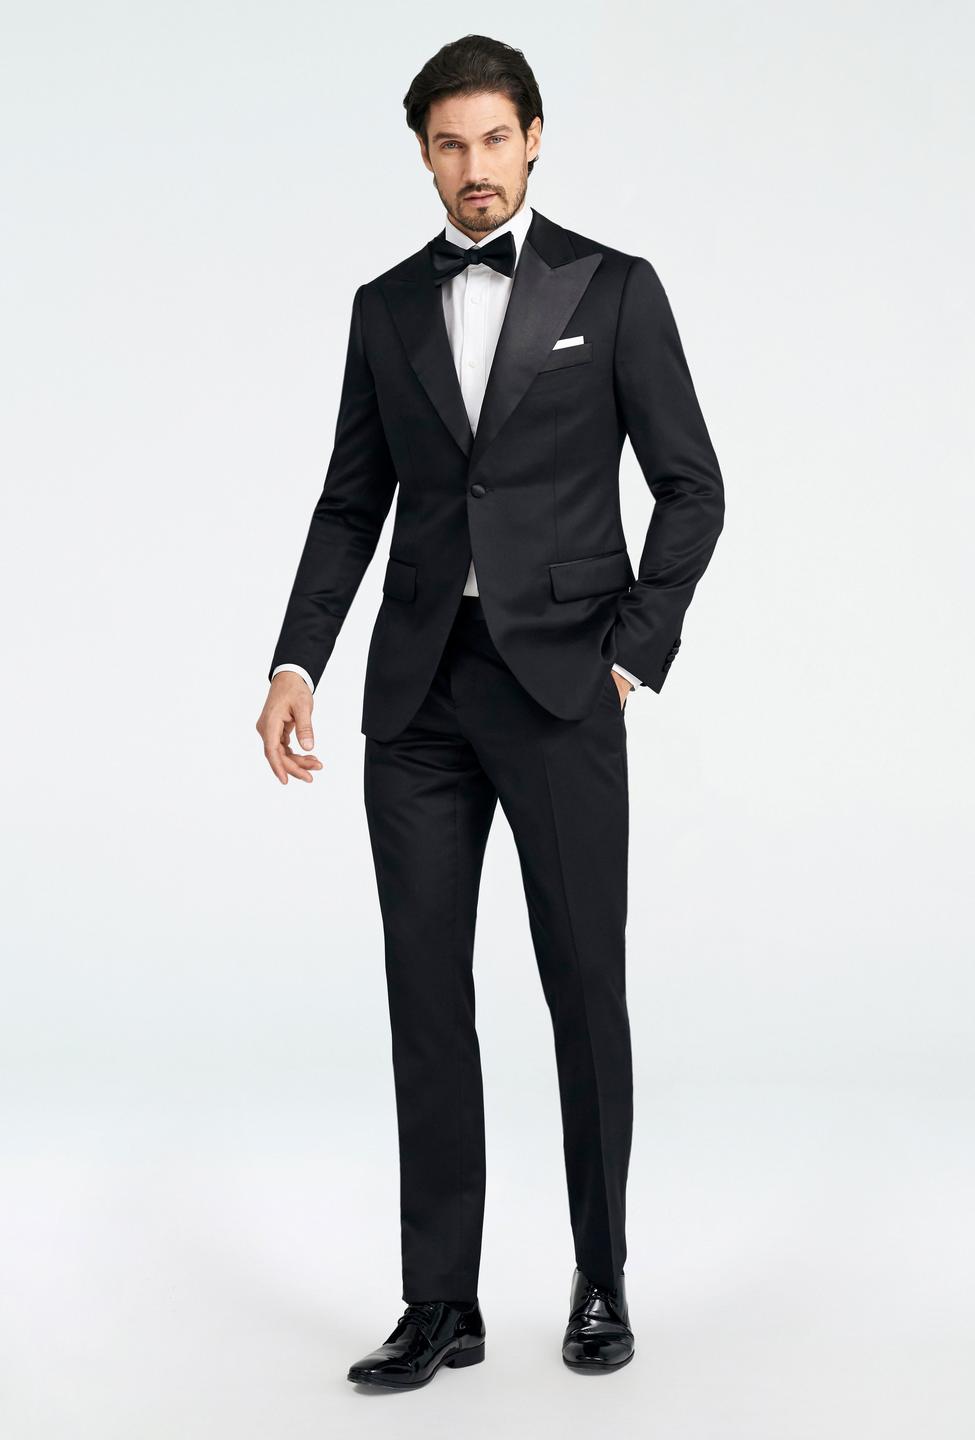 Black suit - Hampton Solid Design from Tuxedo Indochino Collection